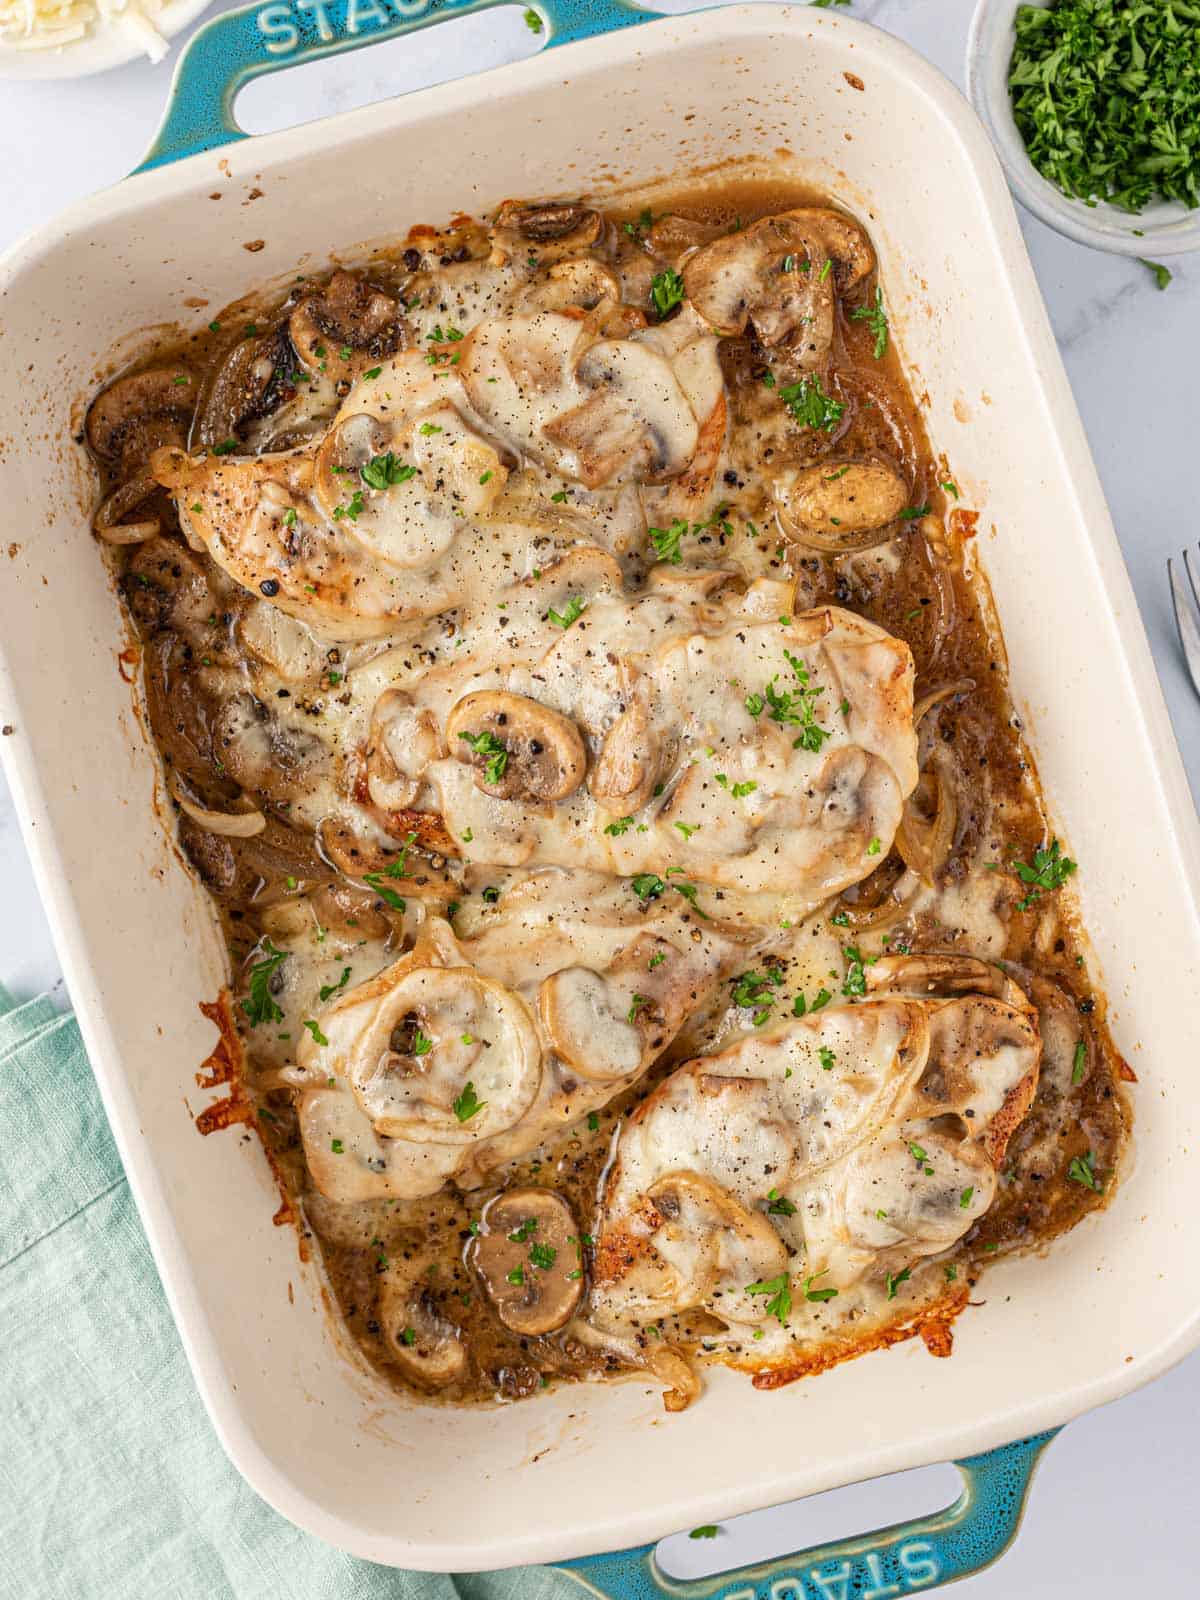 Overhead view of cheesy baked chicken breasts with mushrooms in a blue baking dish.